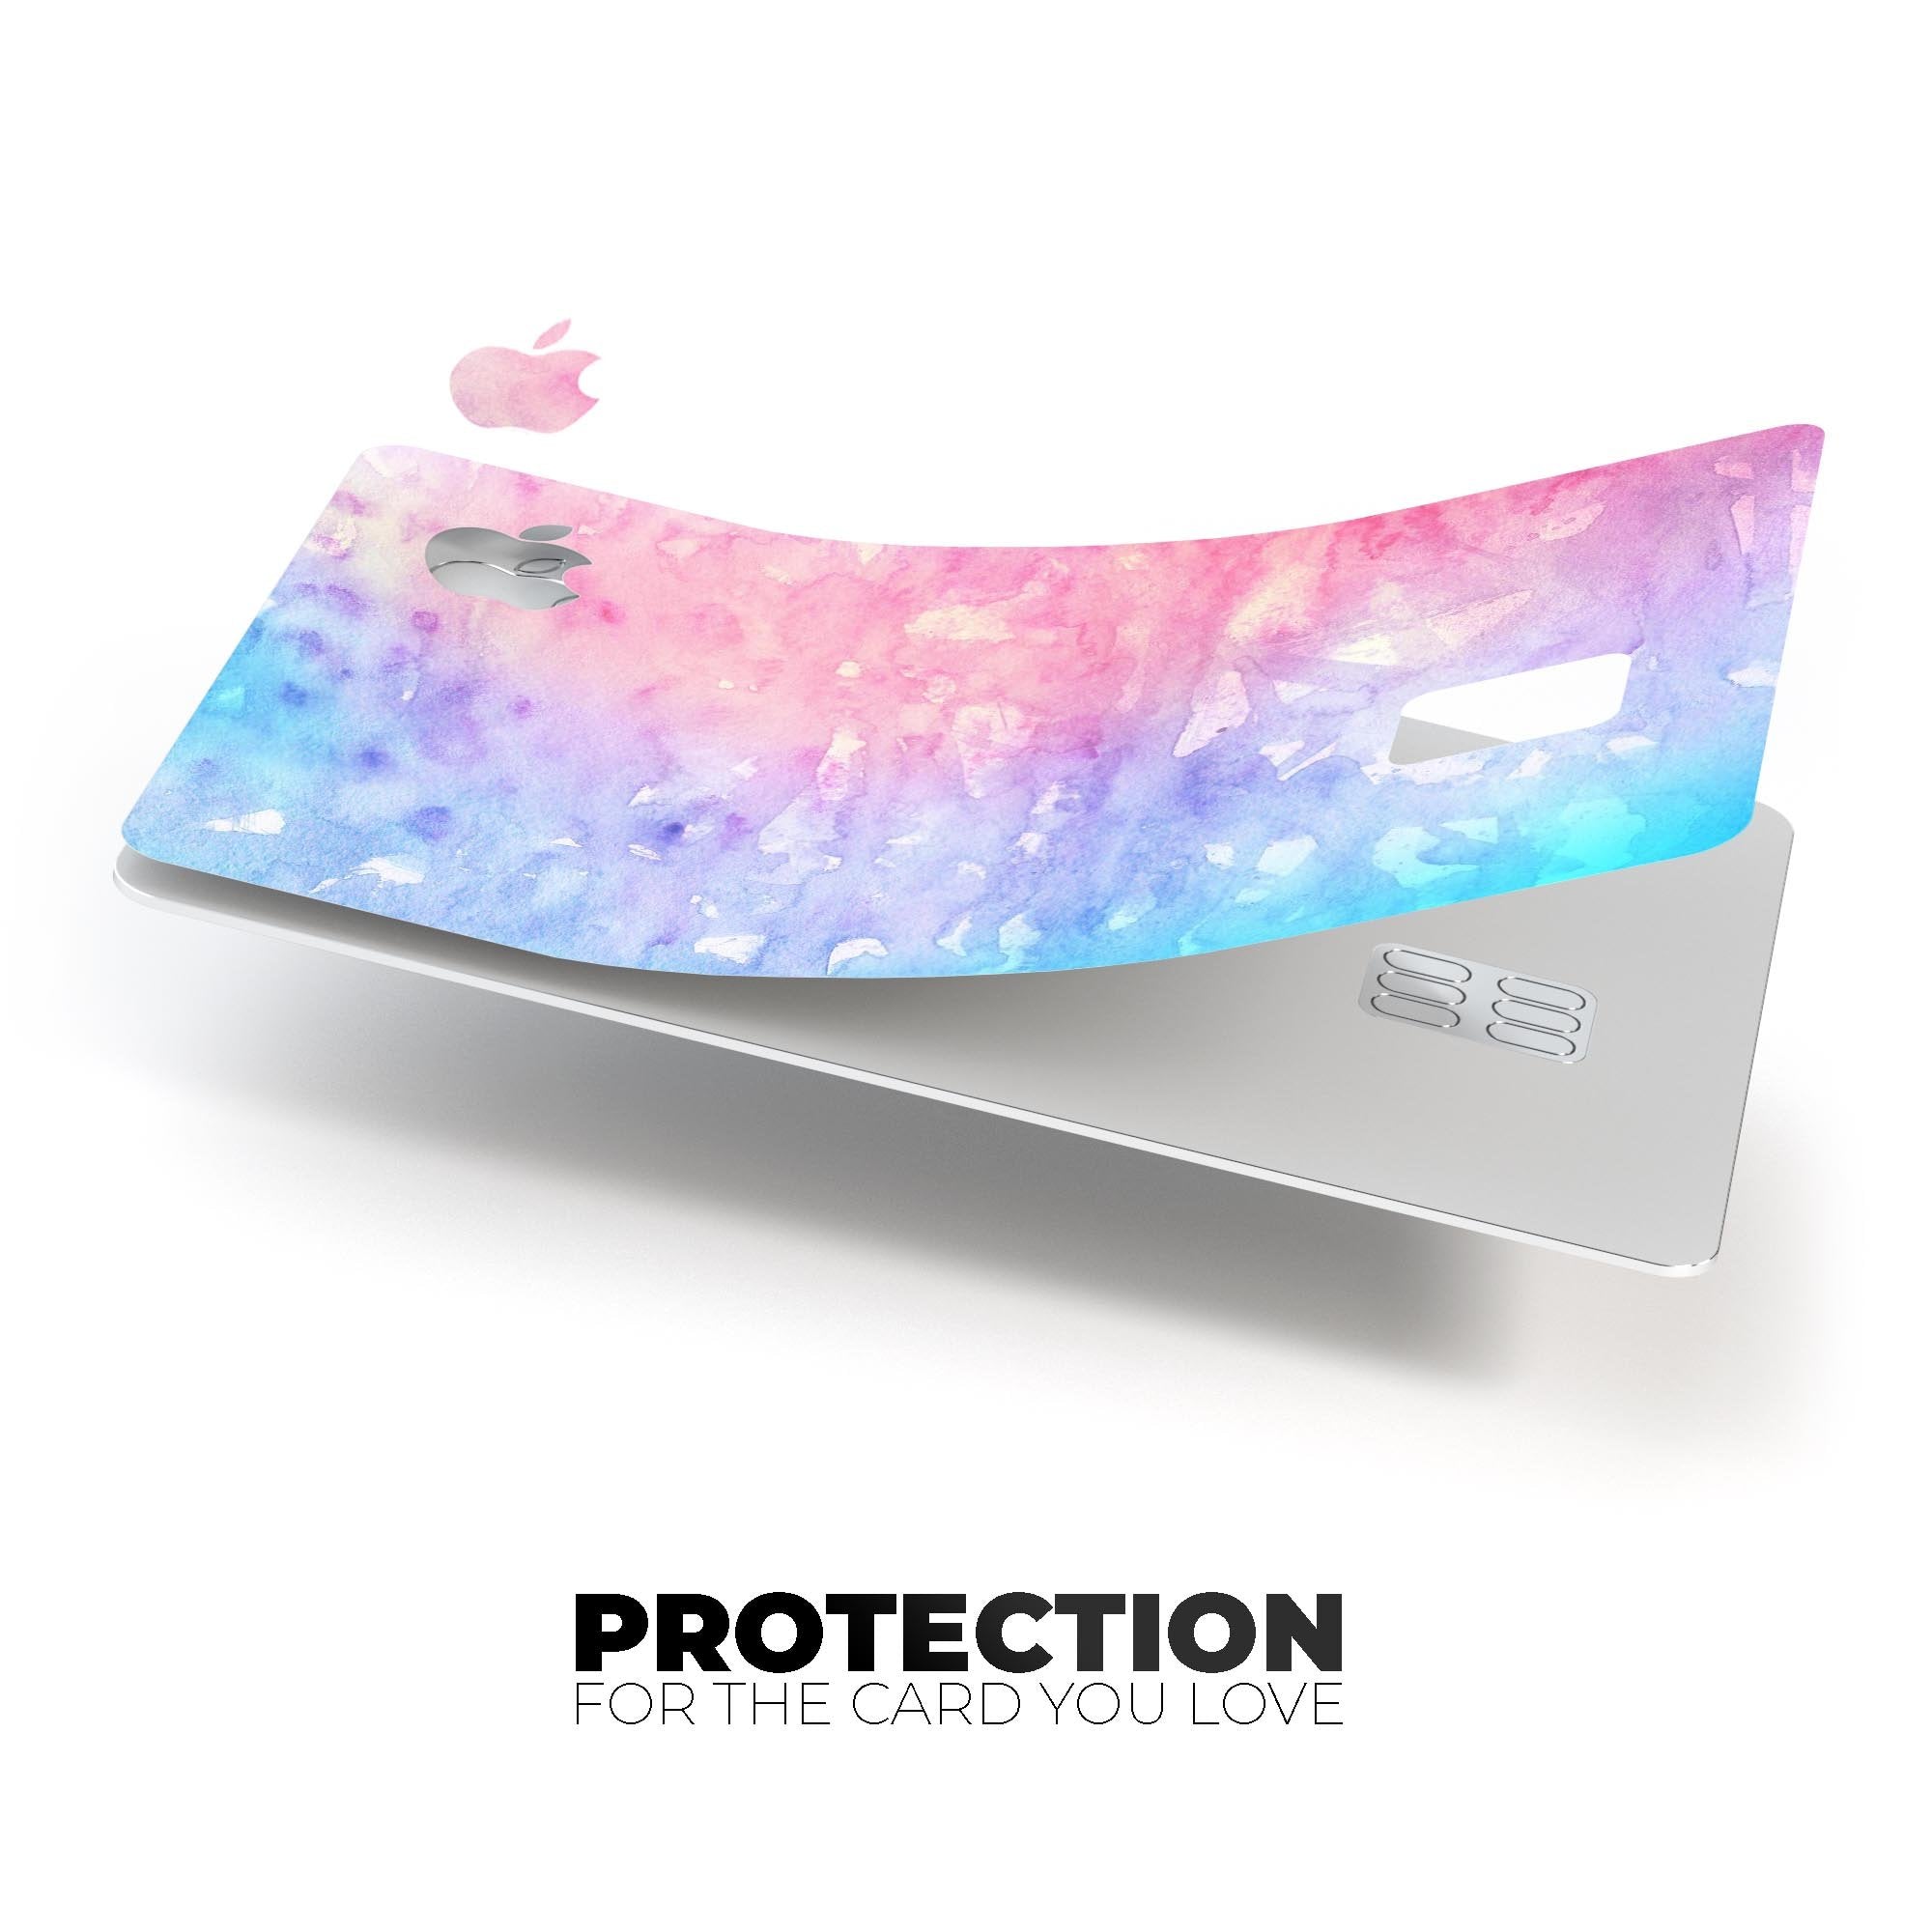 Washed Pink 4 Absorbed Watercolor Texture - Premium Protective Decal